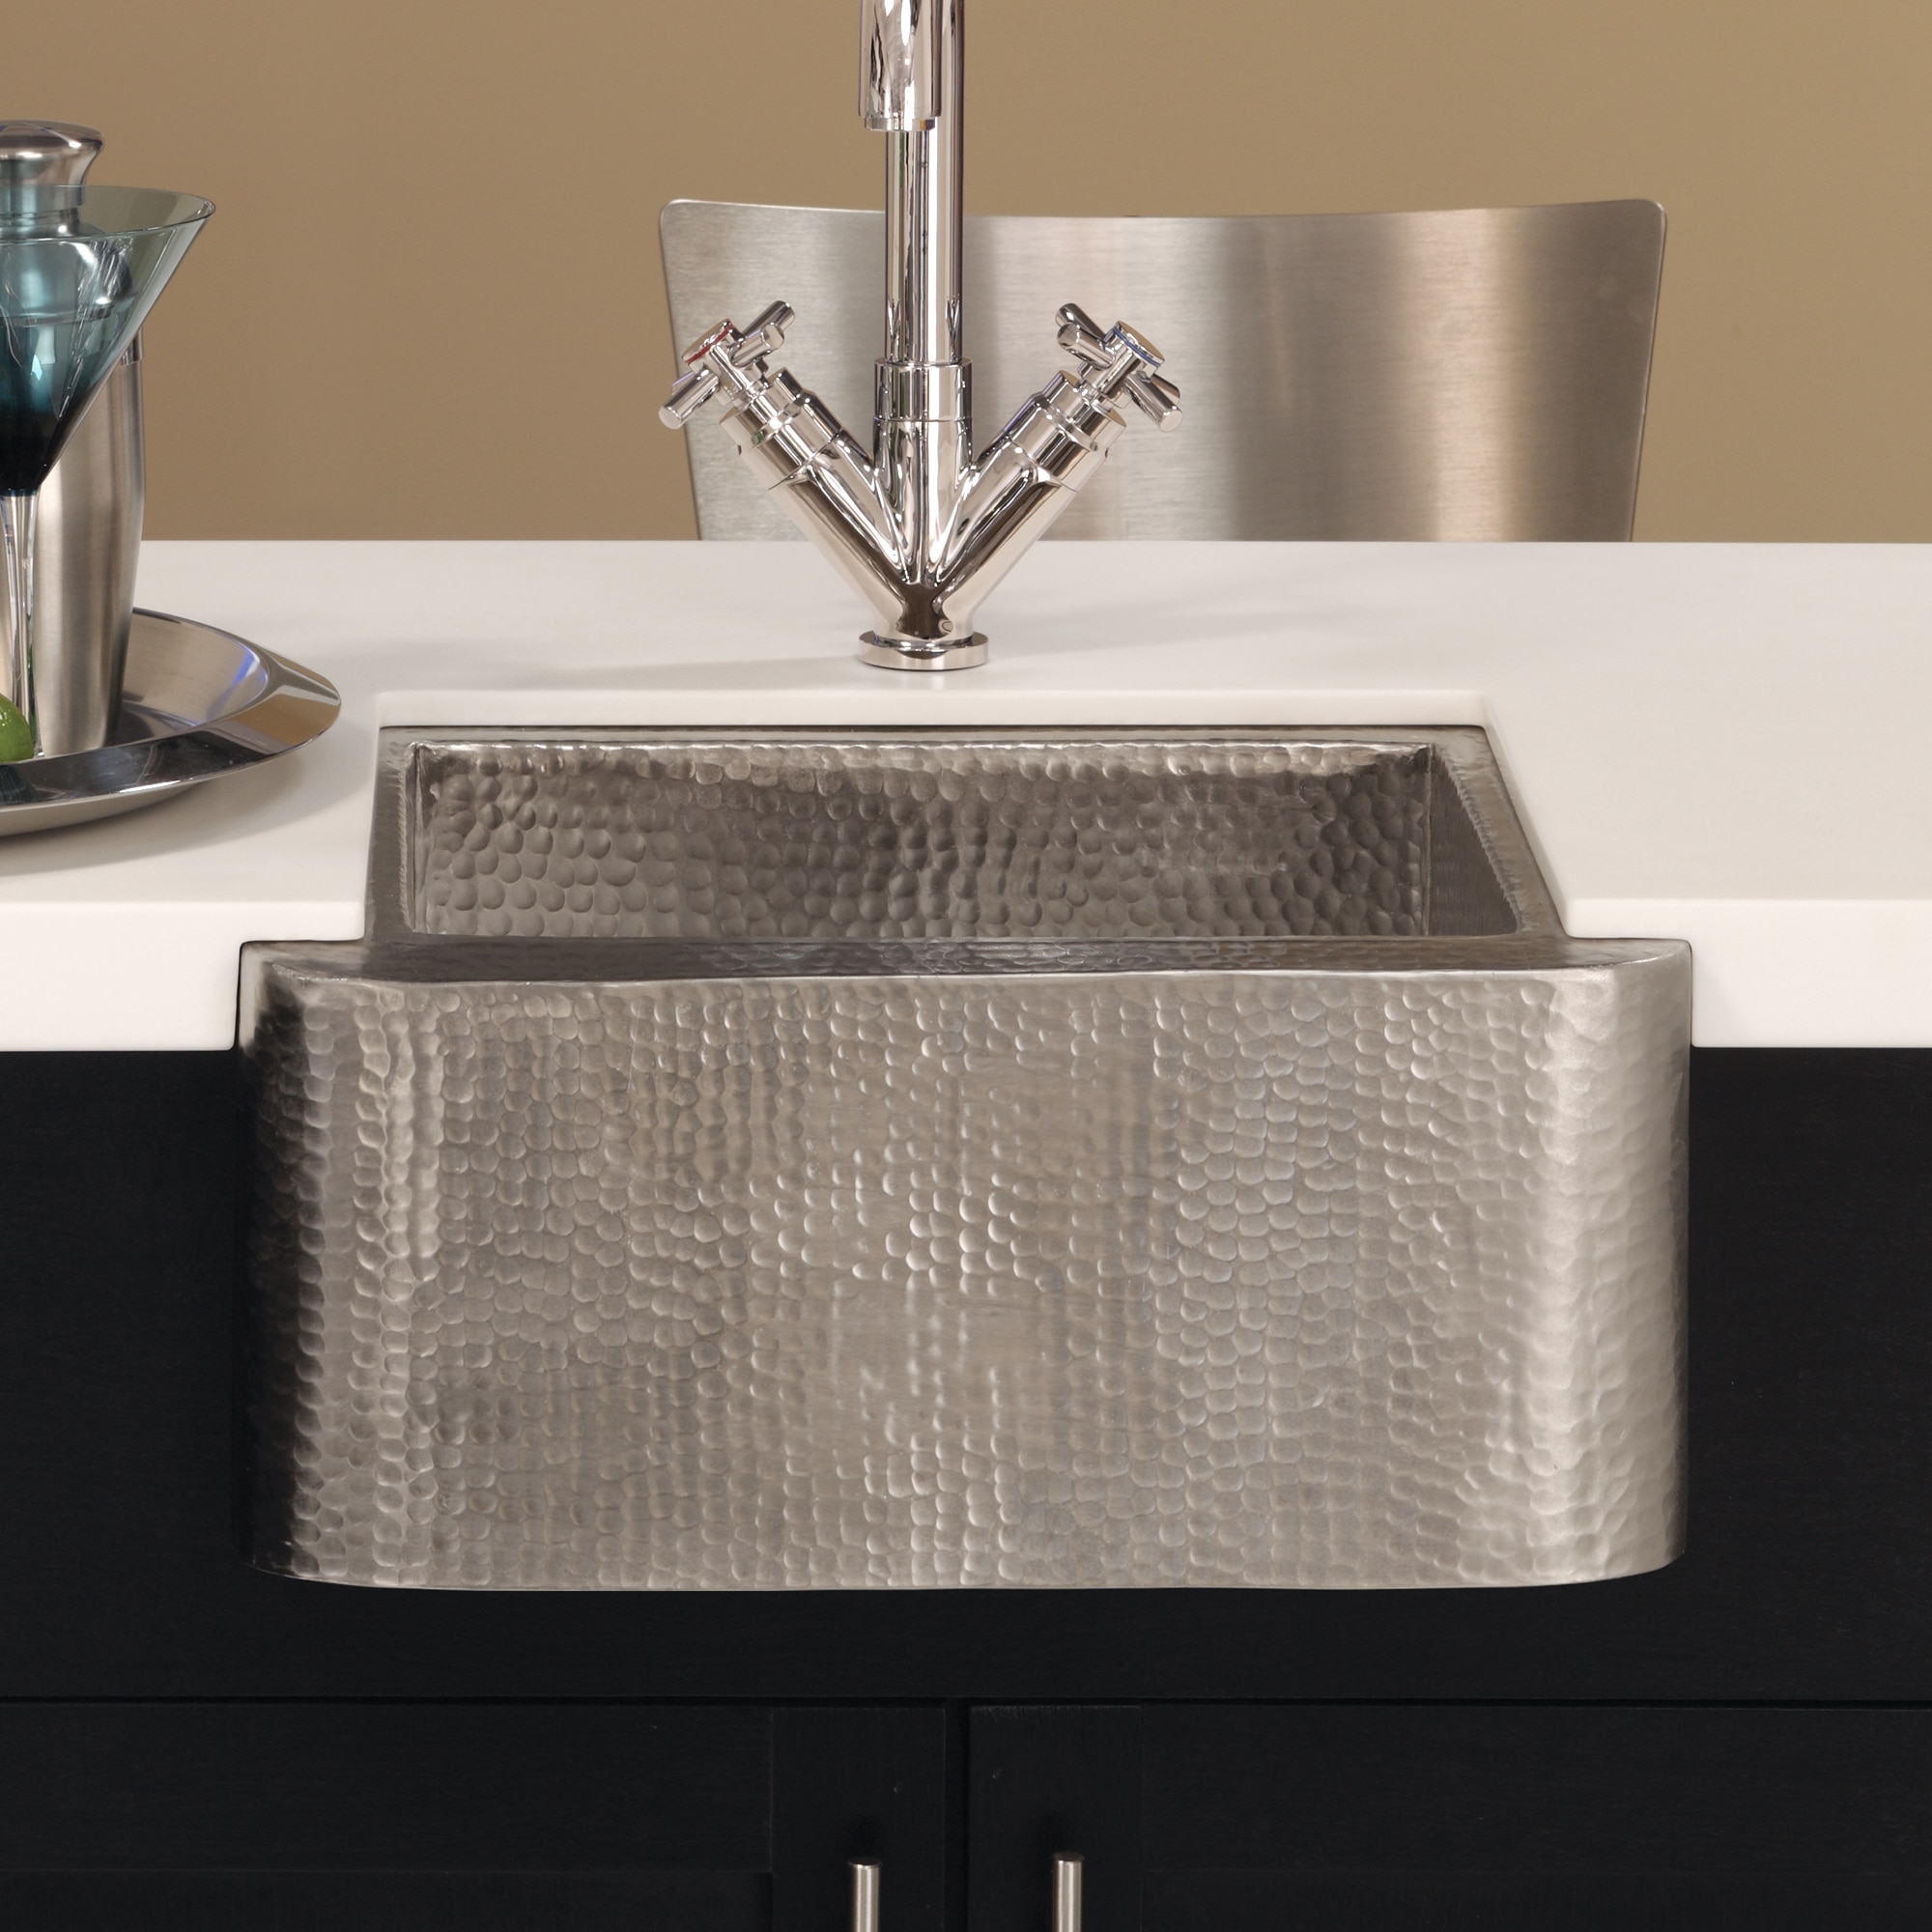 Native Trails Cabana 18 Nickel Farmhouse Sink, Brushed Nickel, CPS513